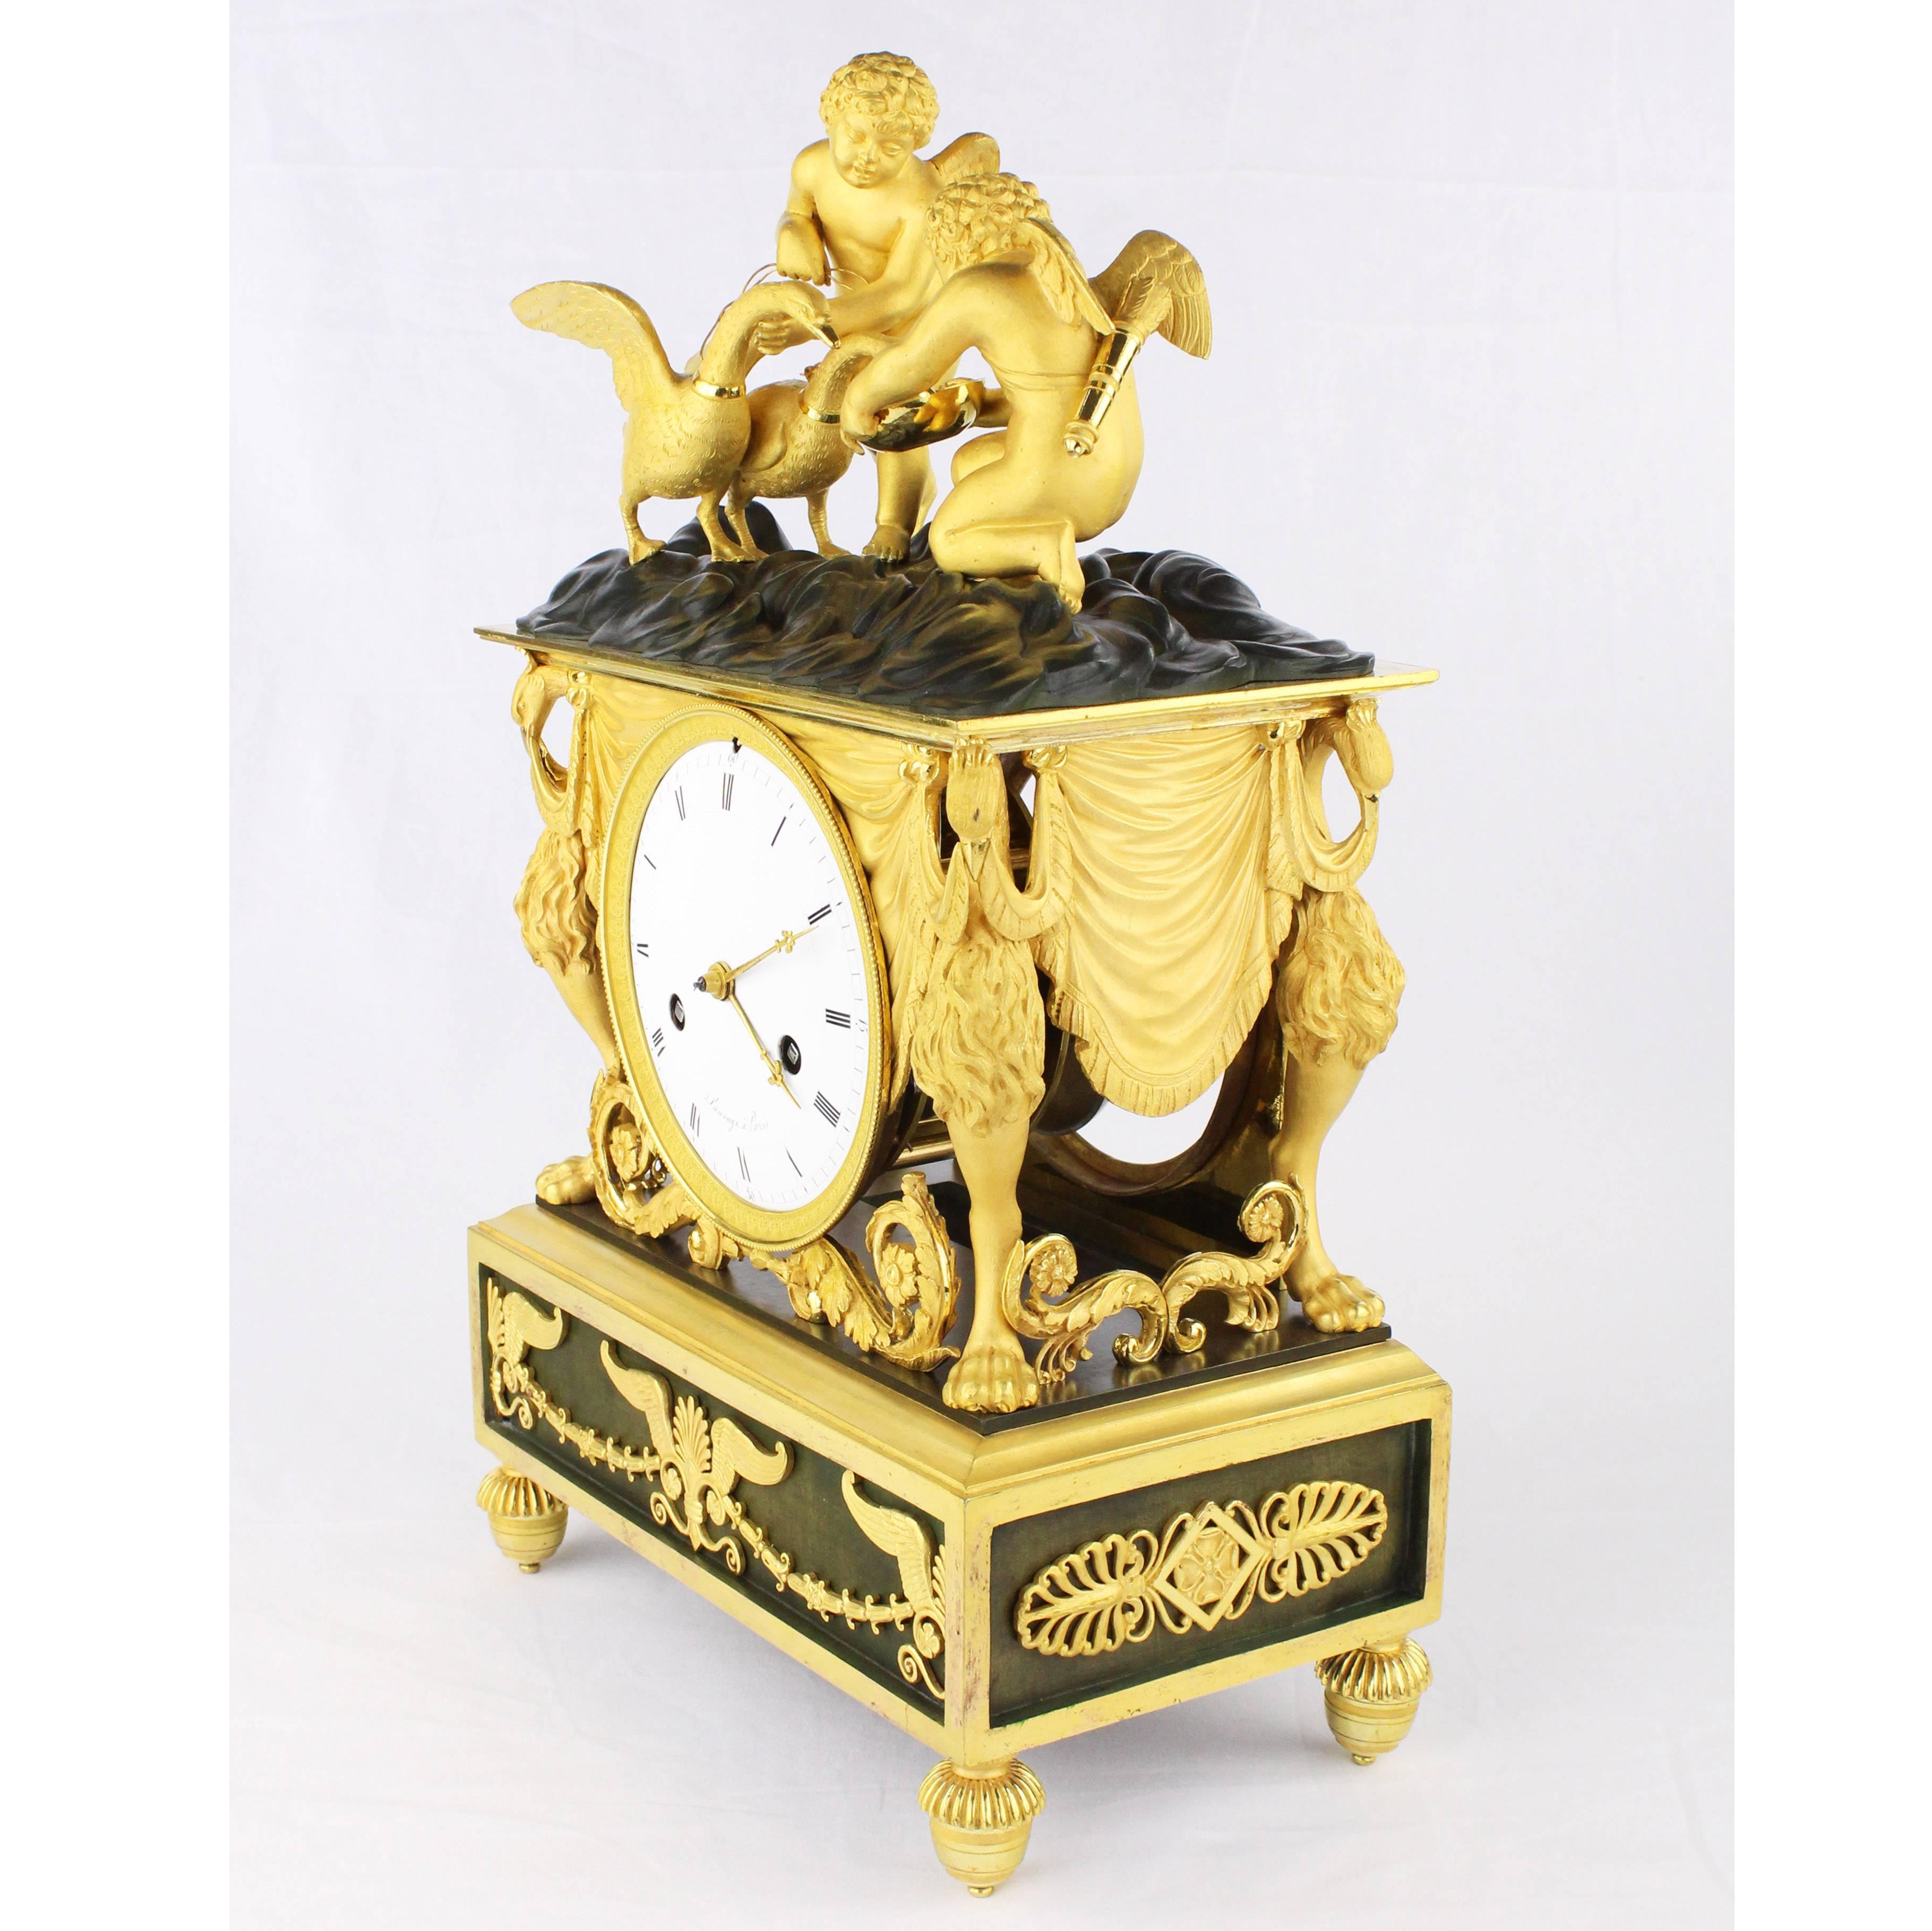 Beautiful rare pendule
France, Directoire, circa 1790-1800
Figurative representation of two Putti with swans
Bronze, fire-giltly
On dial 